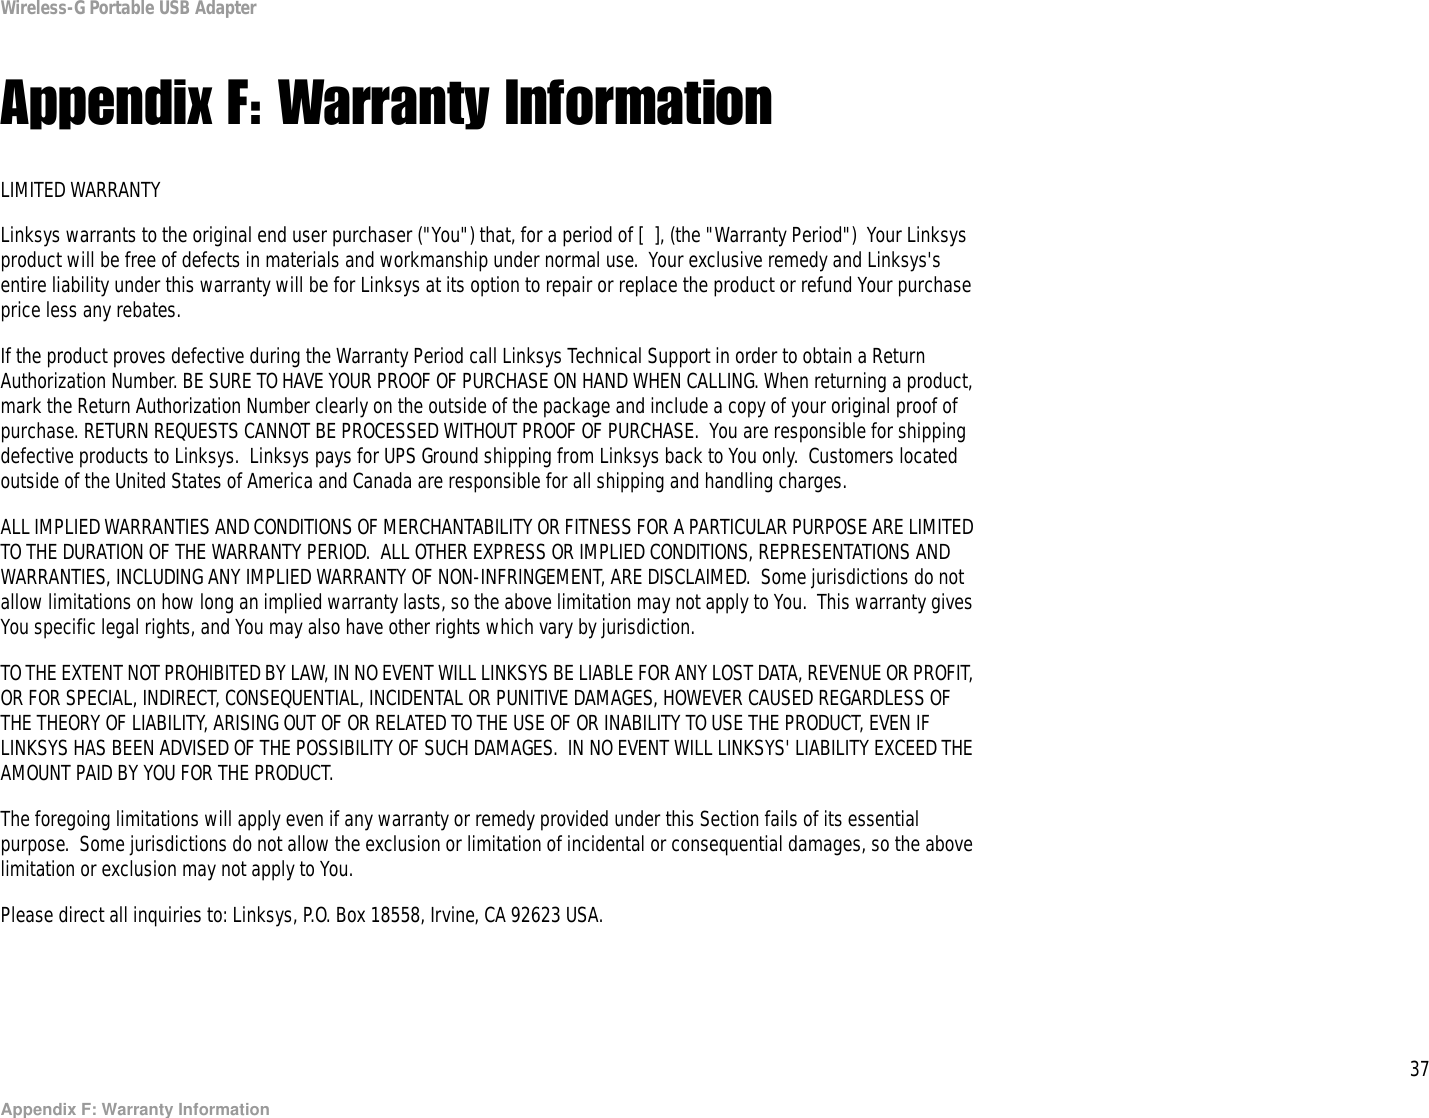 37Appendix F: Warranty InformationWireless-G Portable USB AdapterAppendix F: Warranty InformationLIMITED WARRANTYLinksys warrants to the original end user purchaser (&quot;You&quot;) that, for a period of [  ], (the &quot;Warranty Period&quot;)  Your Linksys product will be free of defects in materials and workmanship under normal use.  Your exclusive remedy and Linksys&apos;s entire liability under this warranty will be for Linksys at its option to repair or replace the product or refund Your purchase price less any rebates.If the product proves defective during the Warranty Period call Linksys Technical Support in order to obtain a Return Authorization Number. BE SURE TO HAVE YOUR PROOF OF PURCHASE ON HAND WHEN CALLING. When returning a product, mark the Return Authorization Number clearly on the outside of the package and include a copy of your original proof of purchase. RETURN REQUESTS CANNOT BE PROCESSED WITHOUT PROOF OF PURCHASE.  You are responsible for shipping defective products to Linksys.  Linksys pays for UPS Ground shipping from Linksys back to You only.  Customers located outside of the United States of America and Canada are responsible for all shipping and handling charges. ALL IMPLIED WARRANTIES AND CONDITIONS OF MERCHANTABILITY OR FITNESS FOR A PARTICULAR PURPOSE ARE LIMITED TO THE DURATION OF THE WARRANTY PERIOD.  ALL OTHER EXPRESS OR IMPLIED CONDITIONS, REPRESENTATIONS AND WARRANTIES, INCLUDING ANY IMPLIED WARRANTY OF NON-INFRINGEMENT, ARE DISCLAIMED.  Some jurisdictions do not allow limitations on how long an implied warranty lasts, so the above limitation may not apply to You.  This warranty gives You specific legal rights, and You may also have other rights which vary by jurisdiction.TO THE EXTENT NOT PROHIBITED BY LAW, IN NO EVENT WILL LINKSYS BE LIABLE FOR ANY LOST DATA, REVENUE OR PROFIT, OR FOR SPECIAL, INDIRECT, CONSEQUENTIAL, INCIDENTAL OR PUNITIVE DAMAGES, HOWEVER CAUSED REGARDLESS OF THE THEORY OF LIABILITY, ARISING OUT OF OR RELATED TO THE USE OF OR INABILITY TO USE THE PRODUCT, EVEN IF LINKSYS HAS BEEN ADVISED OF THE POSSIBILITY OF SUCH DAMAGES.  IN NO EVENT WILL LINKSYS&apos; LIABILITY EXCEED THE AMOUNT PAID BY YOU FOR THE PRODUCT.  The foregoing limitations will apply even if any warranty or remedy provided under this Section fails of its essential purpose.  Some jurisdictions do not allow the exclusion or limitation of incidental or consequential damages, so the above limitation or exclusion may not apply to You.Please direct all inquiries to: Linksys, P.O. Box 18558, Irvine, CA 92623 USA.